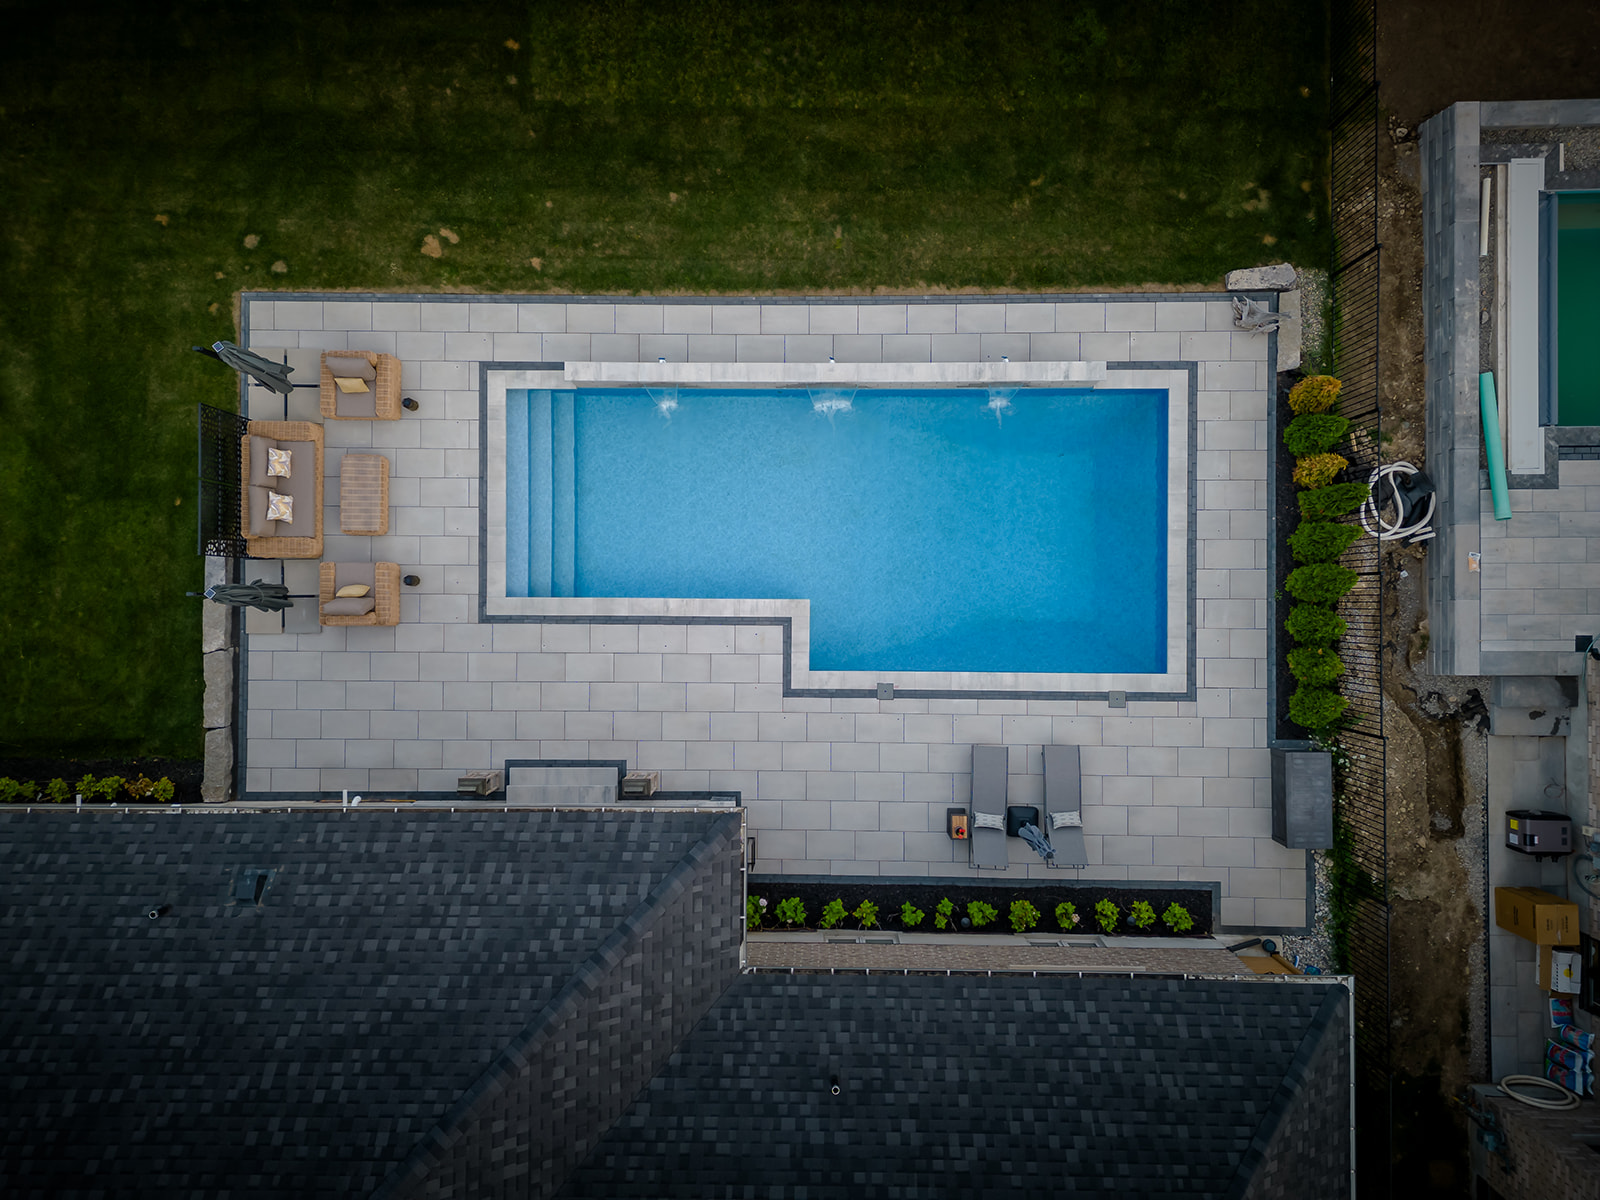 Top-down view of an inground pool, seating area to the left and two lounge chairs to the right.